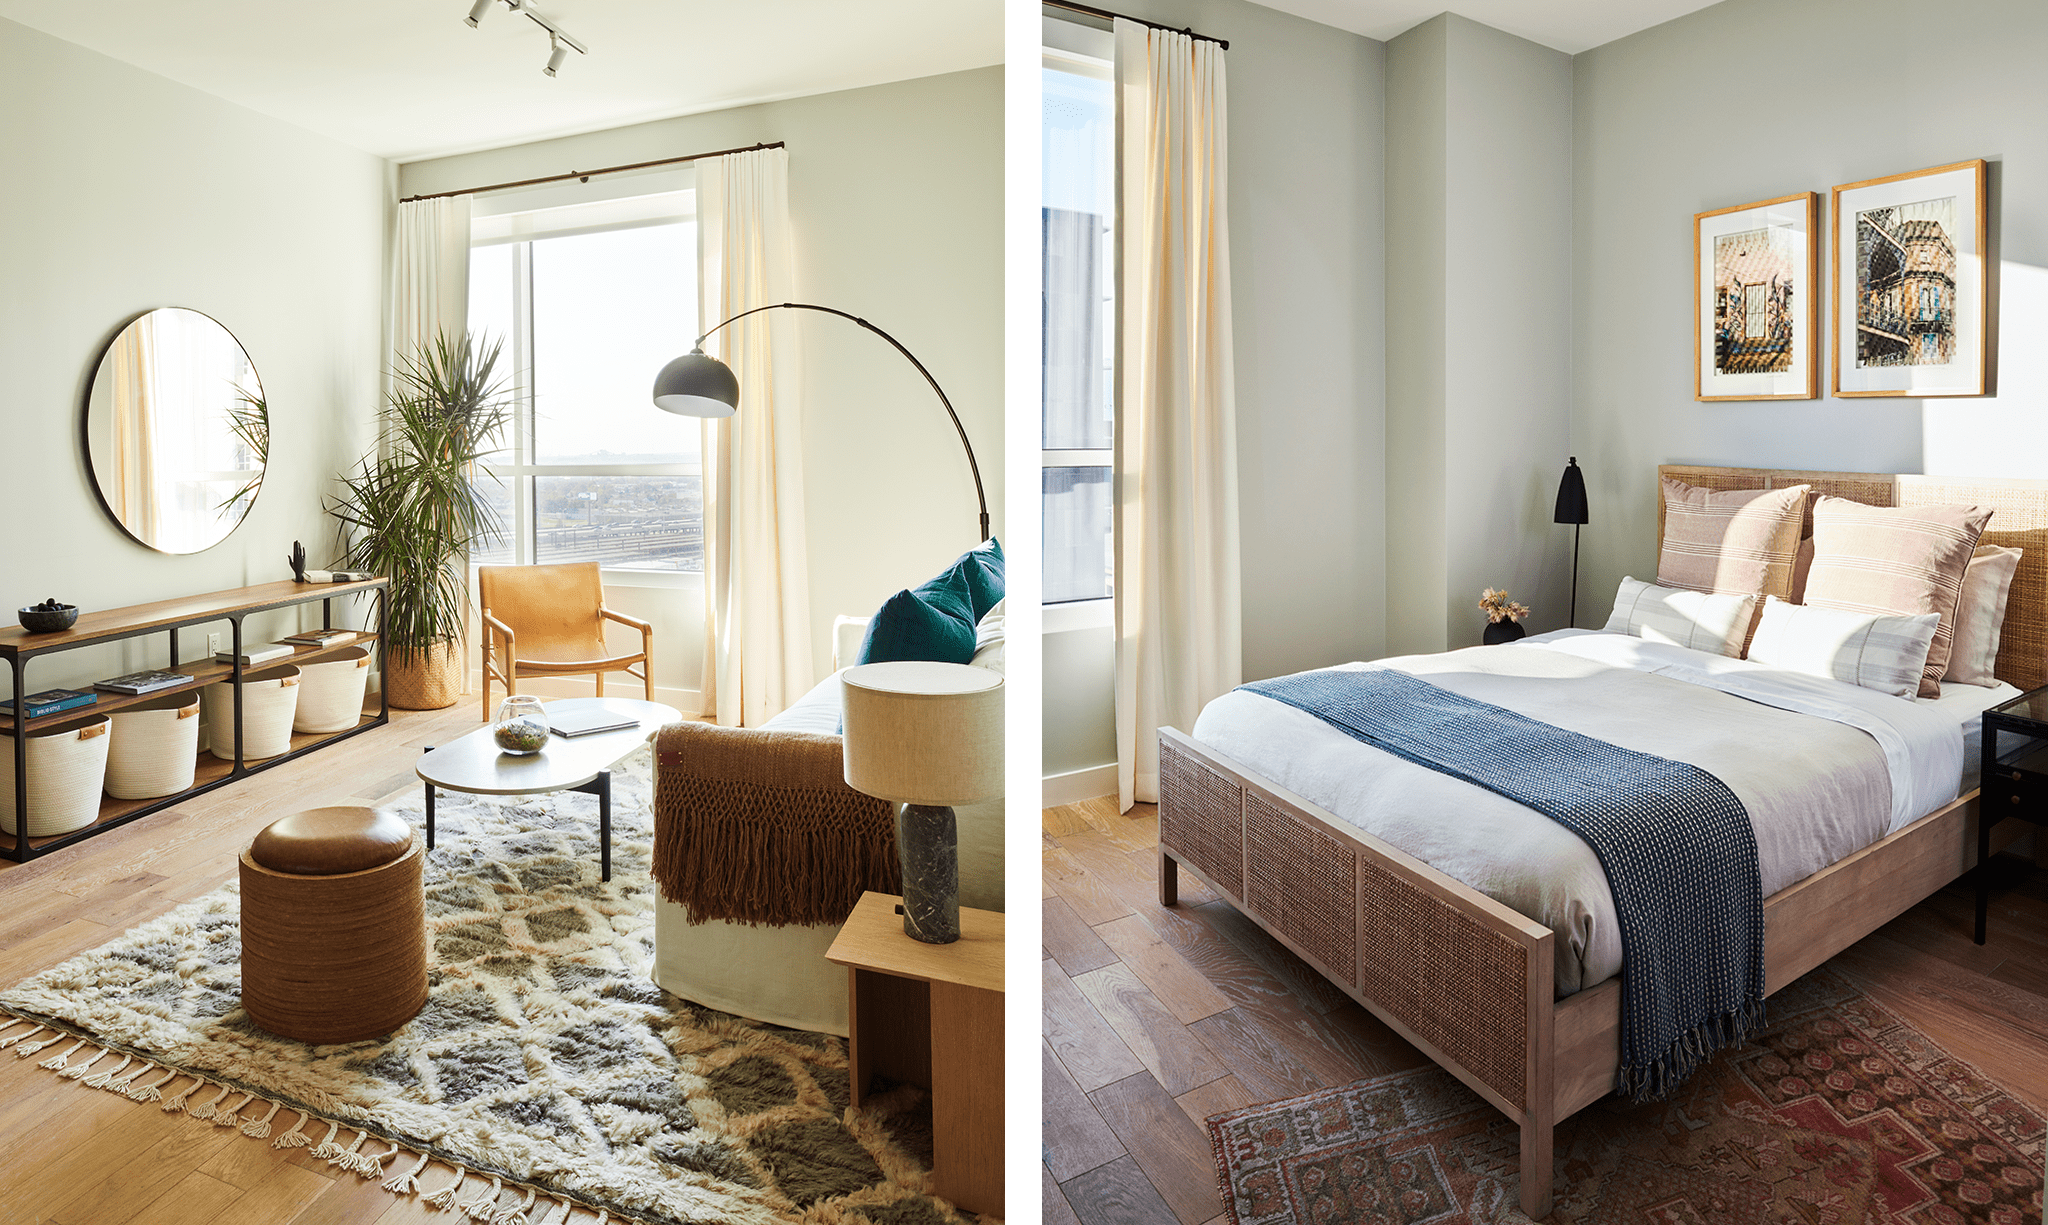 A side-by-side view of a bedroom and living room with ample natural light and a modern, bohemian styled space.